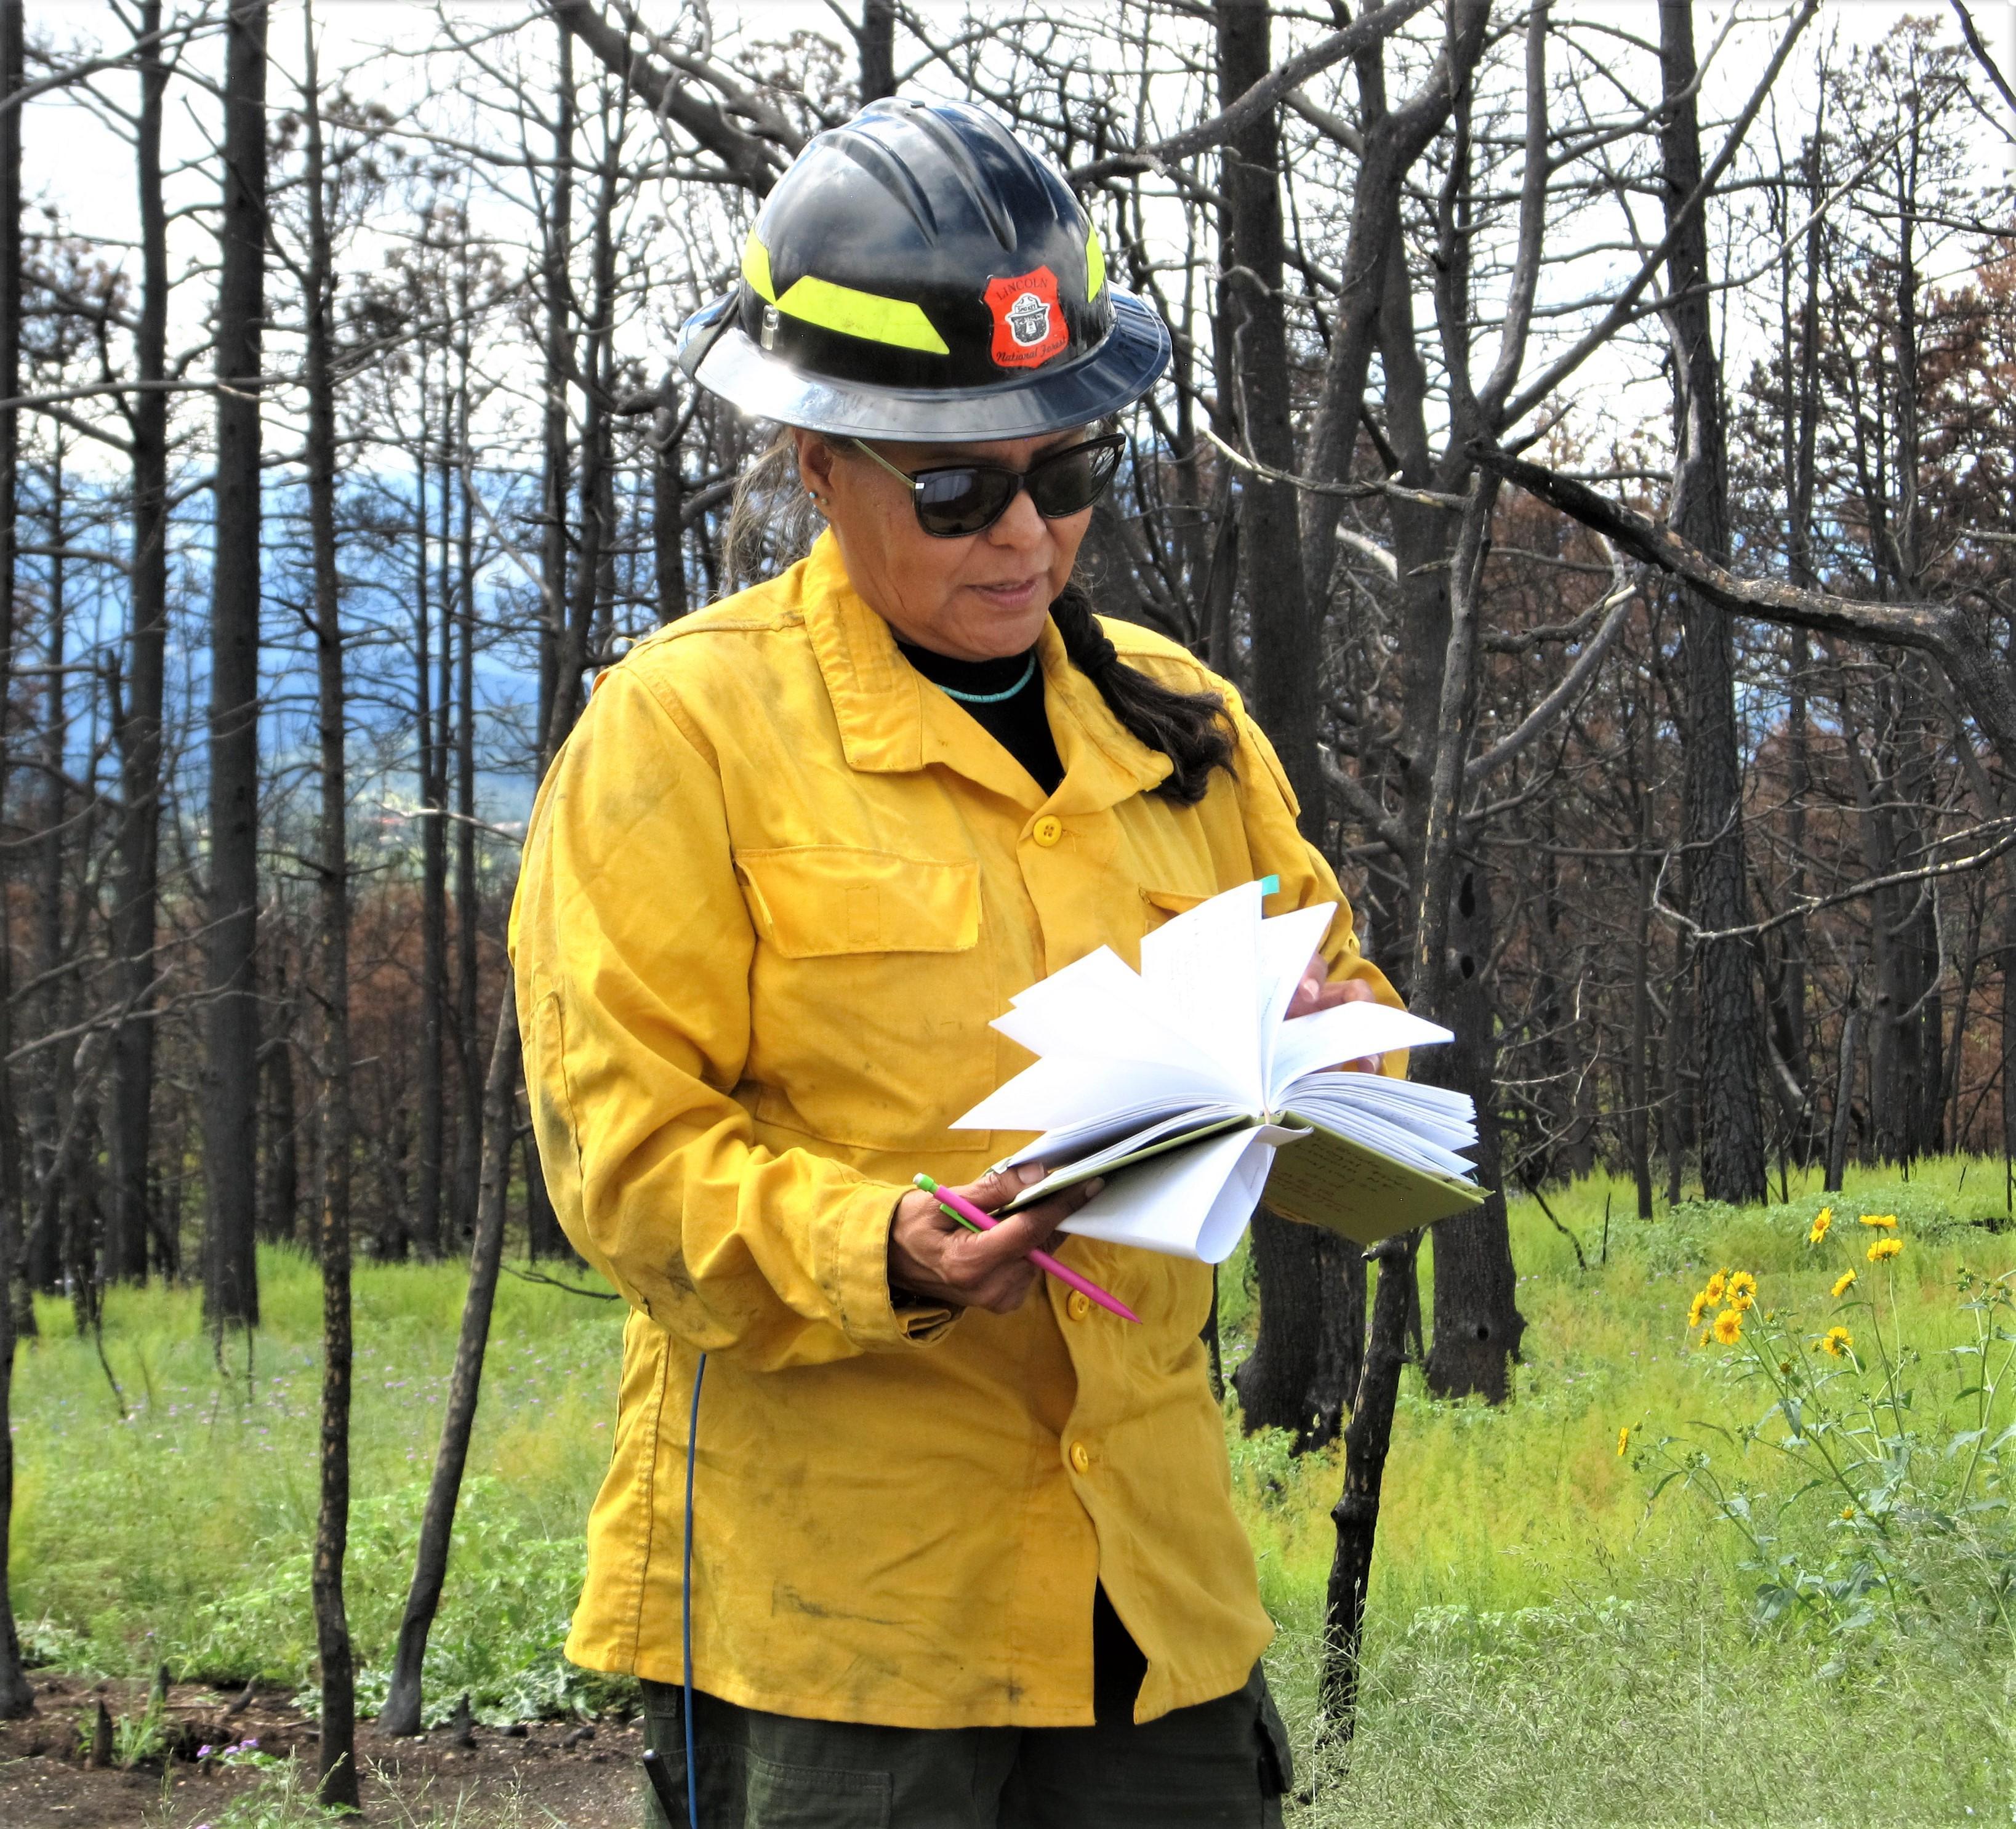 BAER Team Lead shown with notebook in hand ready to document site conditions during aerial seeding operations